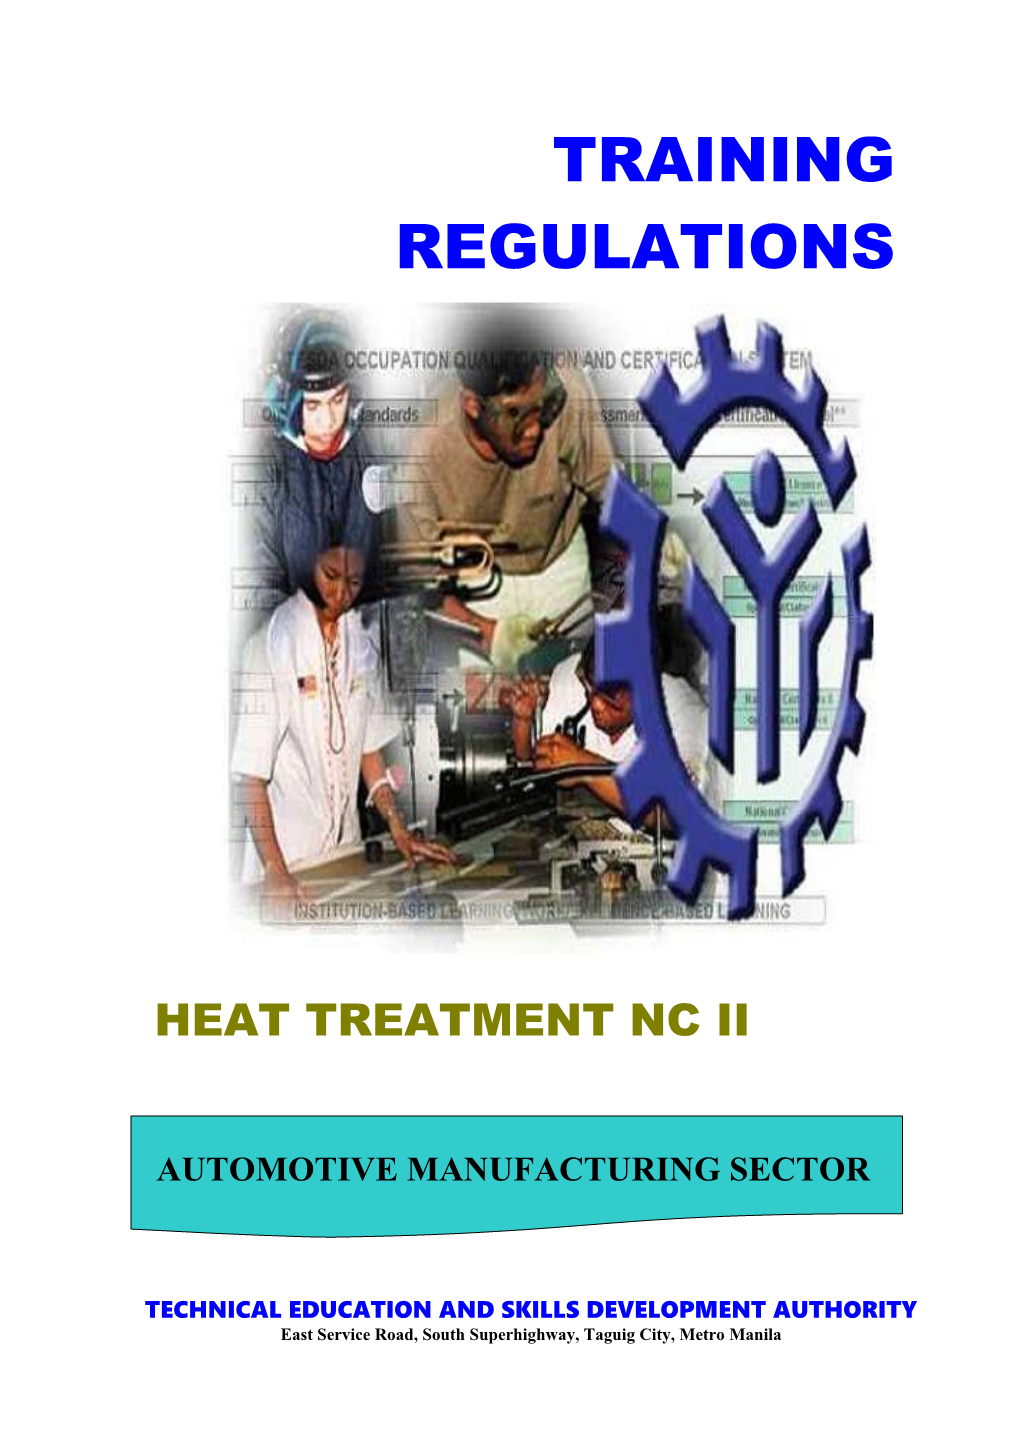 Automotive Manufacturing Sub Sector